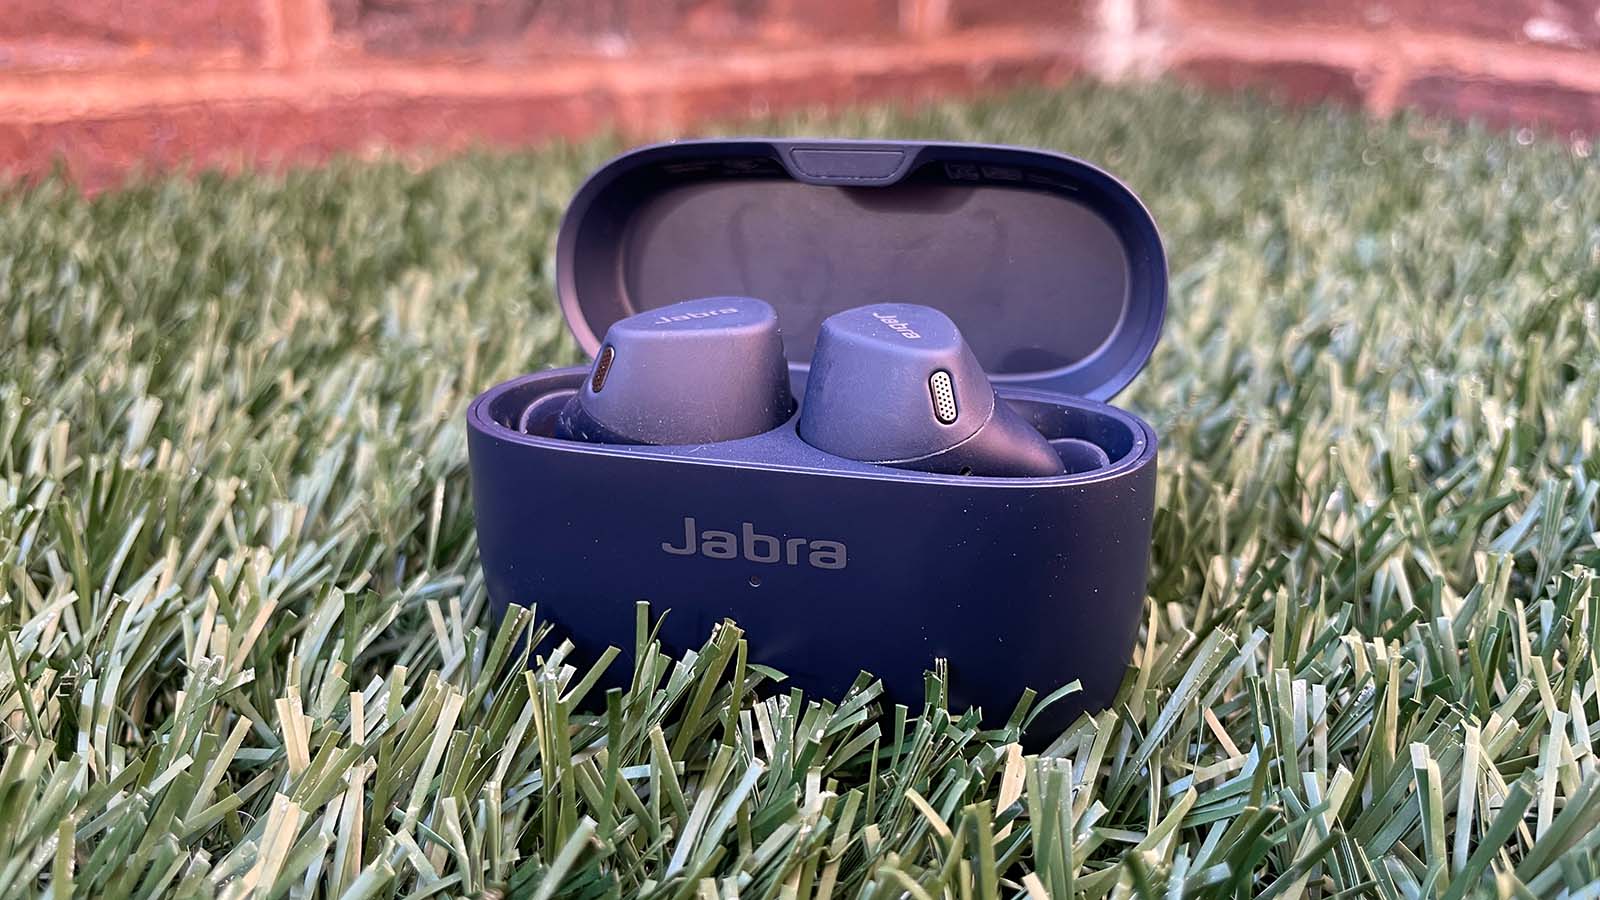 Jabra Elite 4 Active review: small, light and energetic wireless earbuds